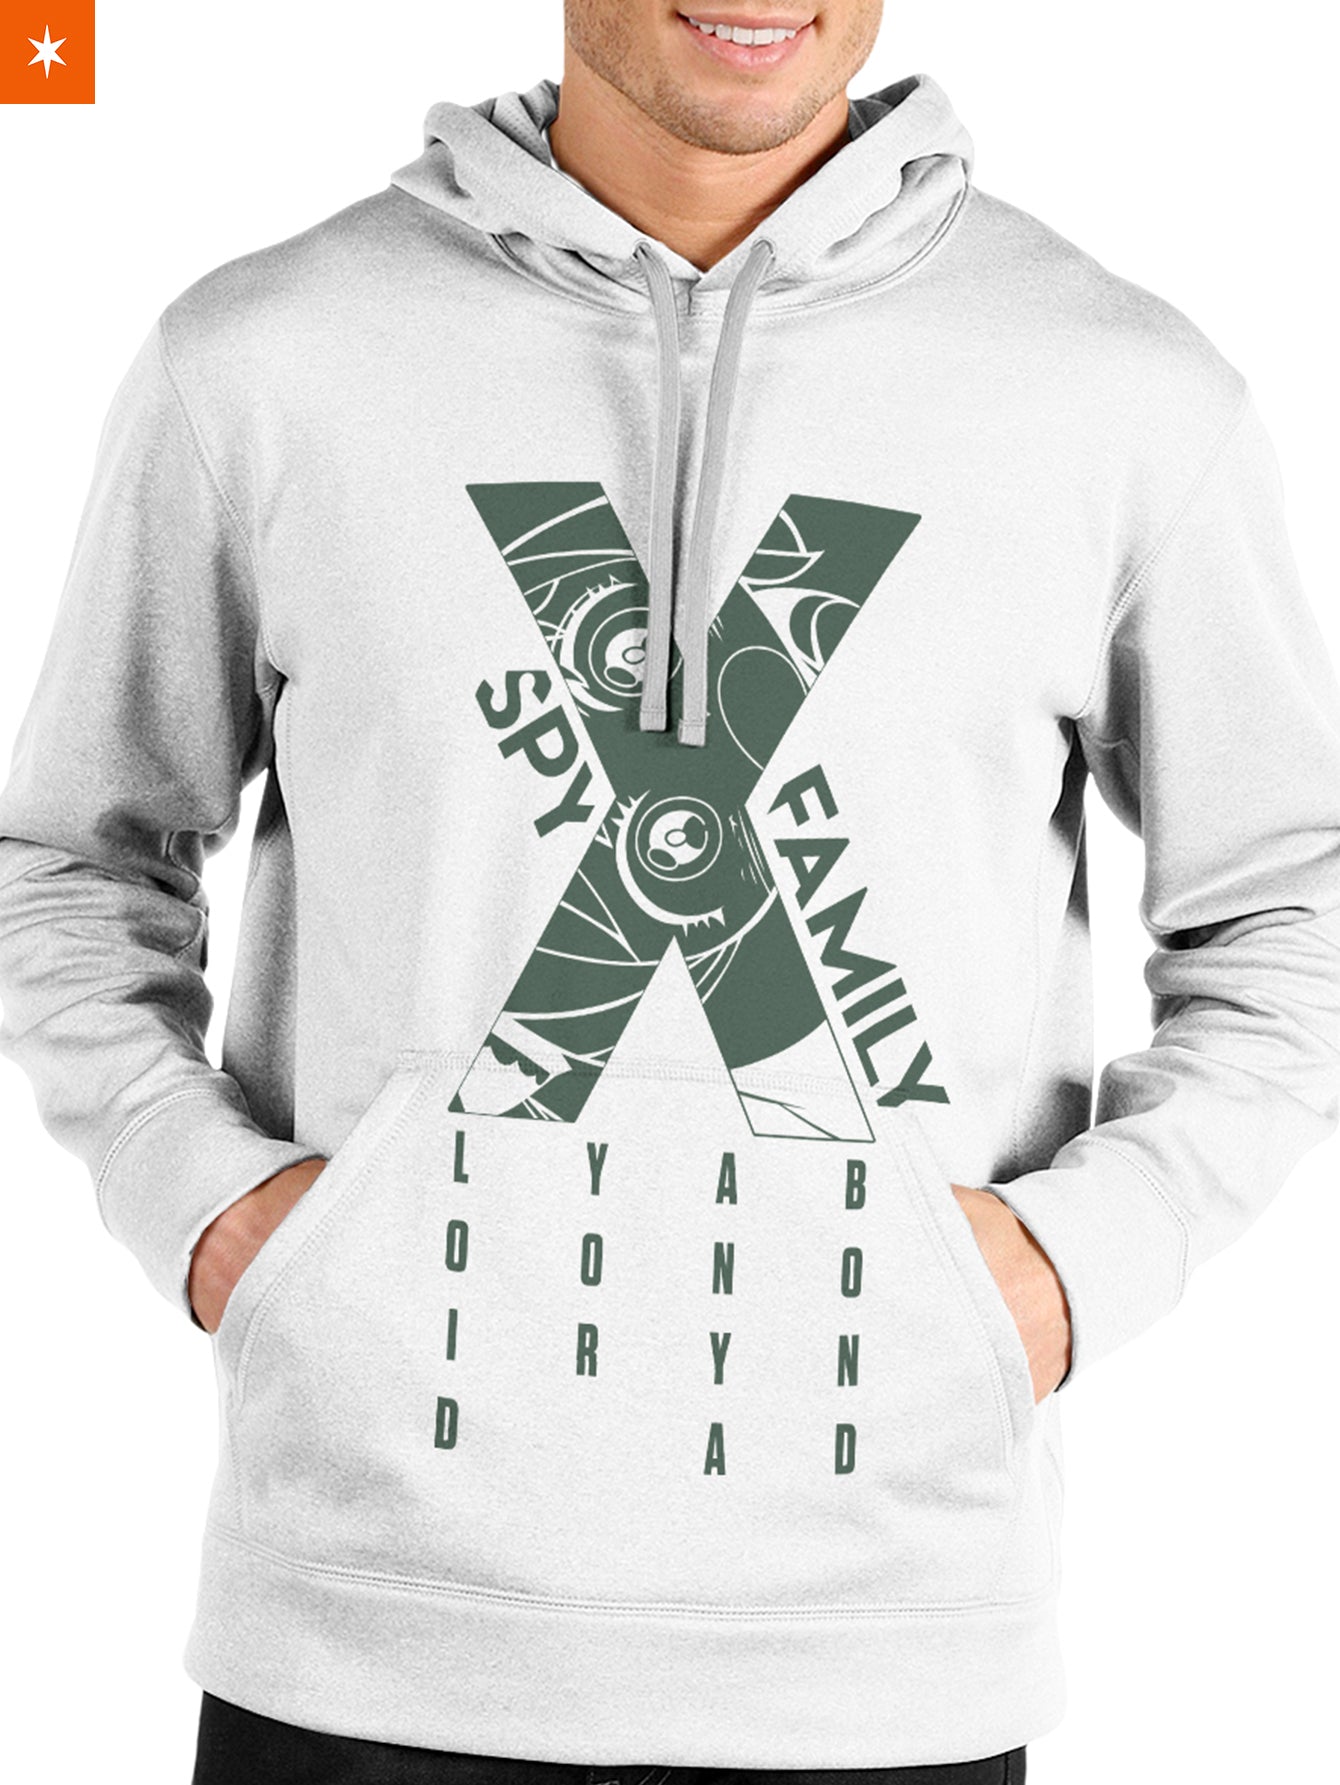 Fandomaniax - The Forgers Unisex Pullover Hoodie